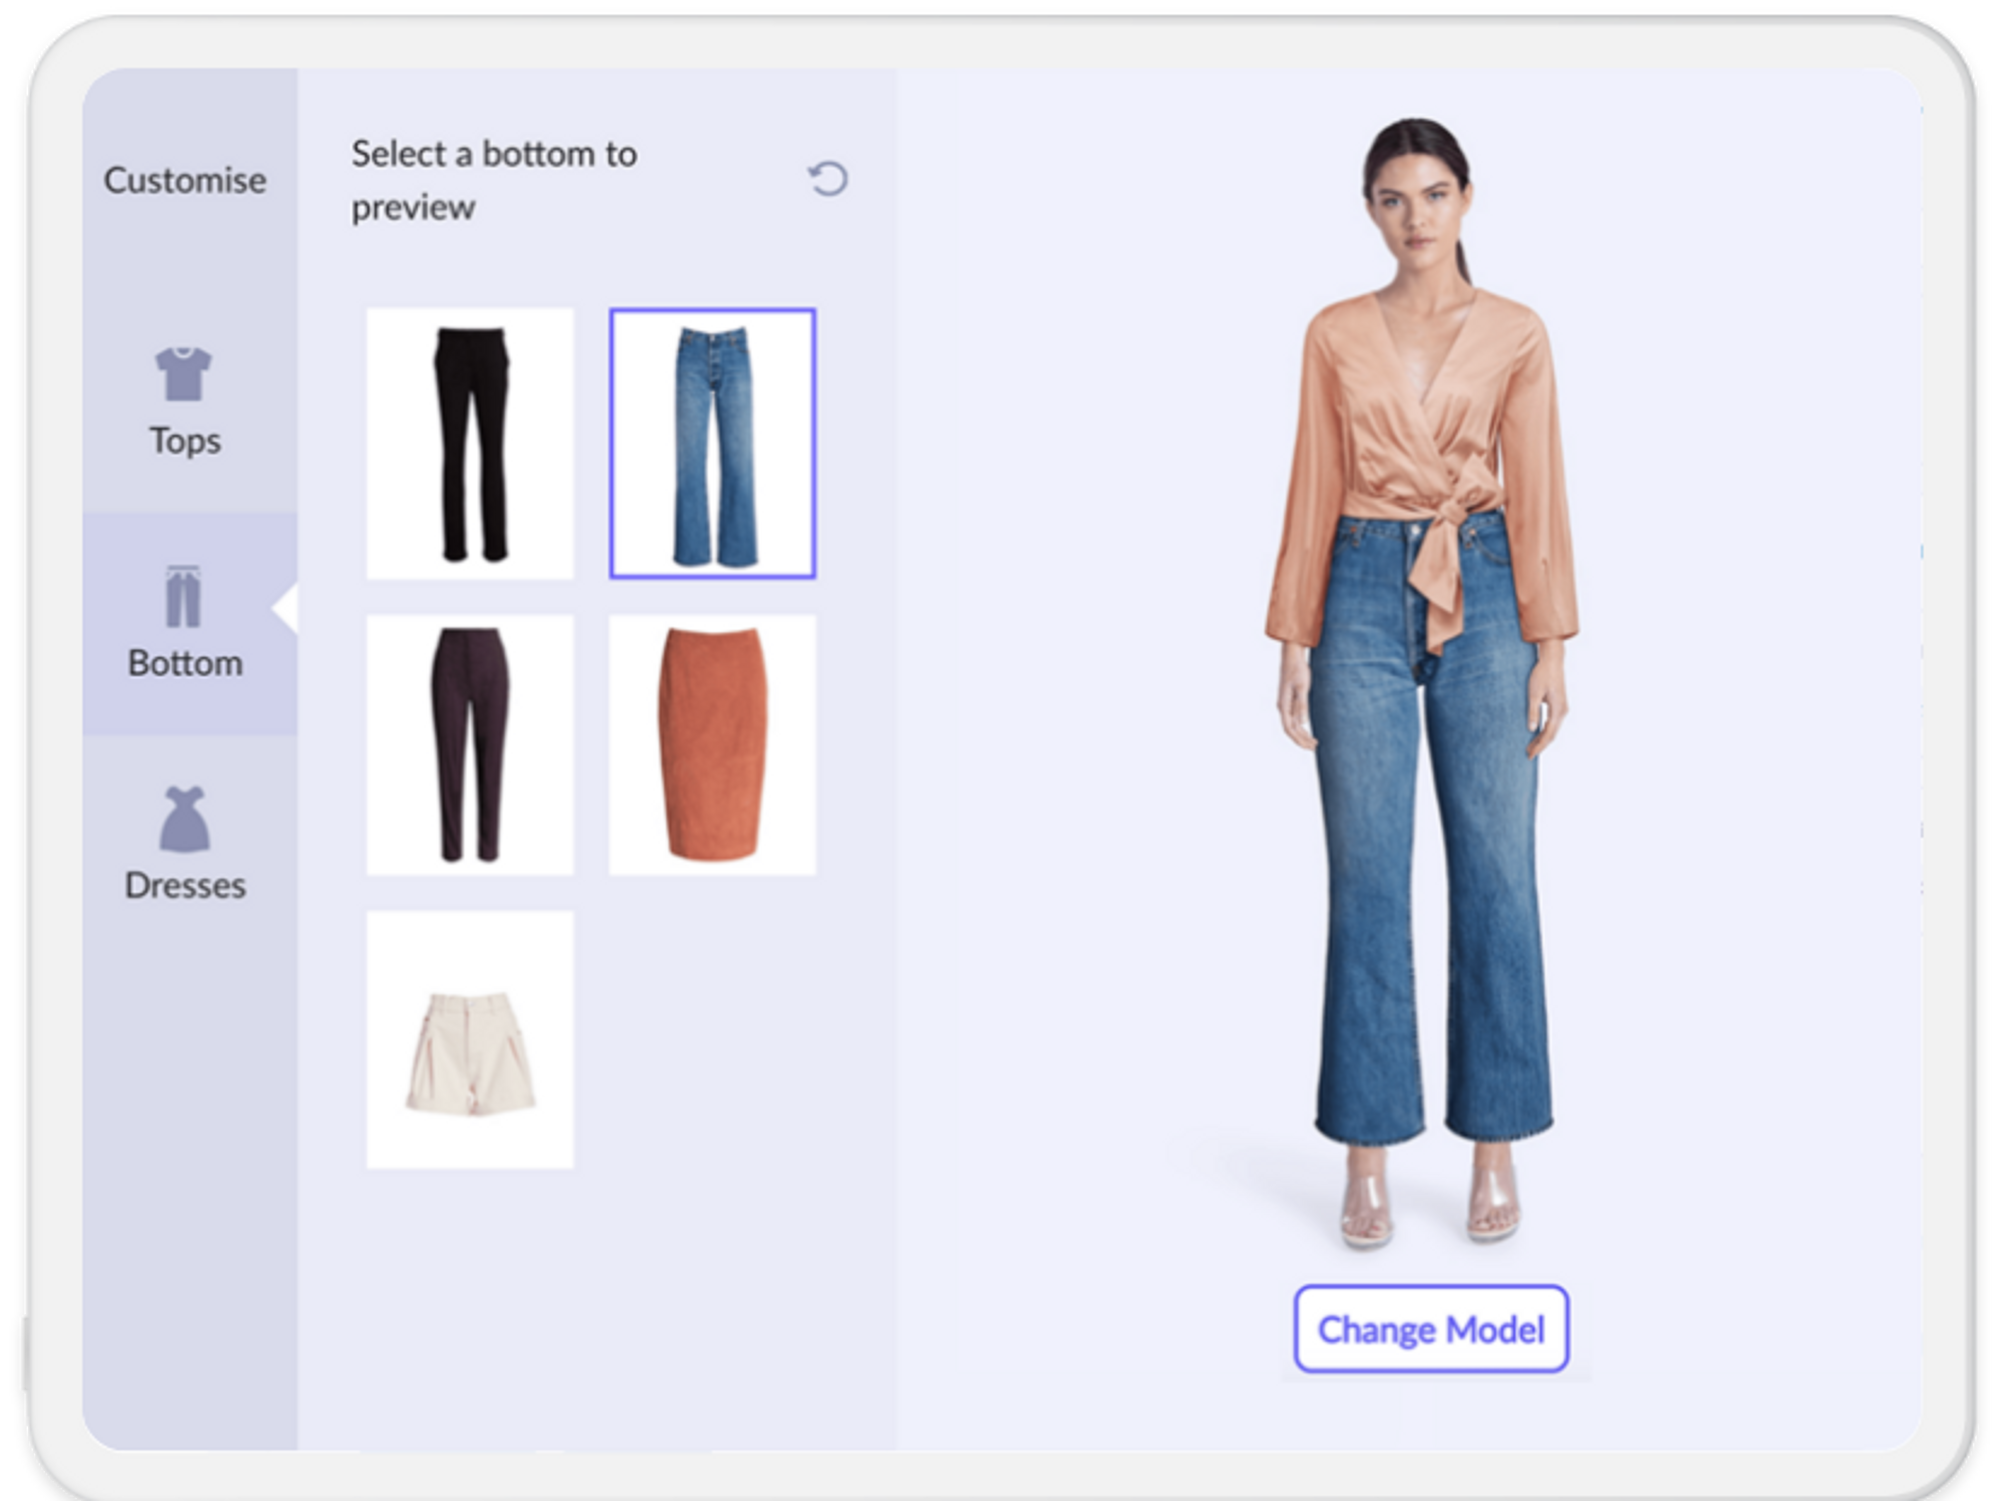 The Current Machine learning meets the fitting room